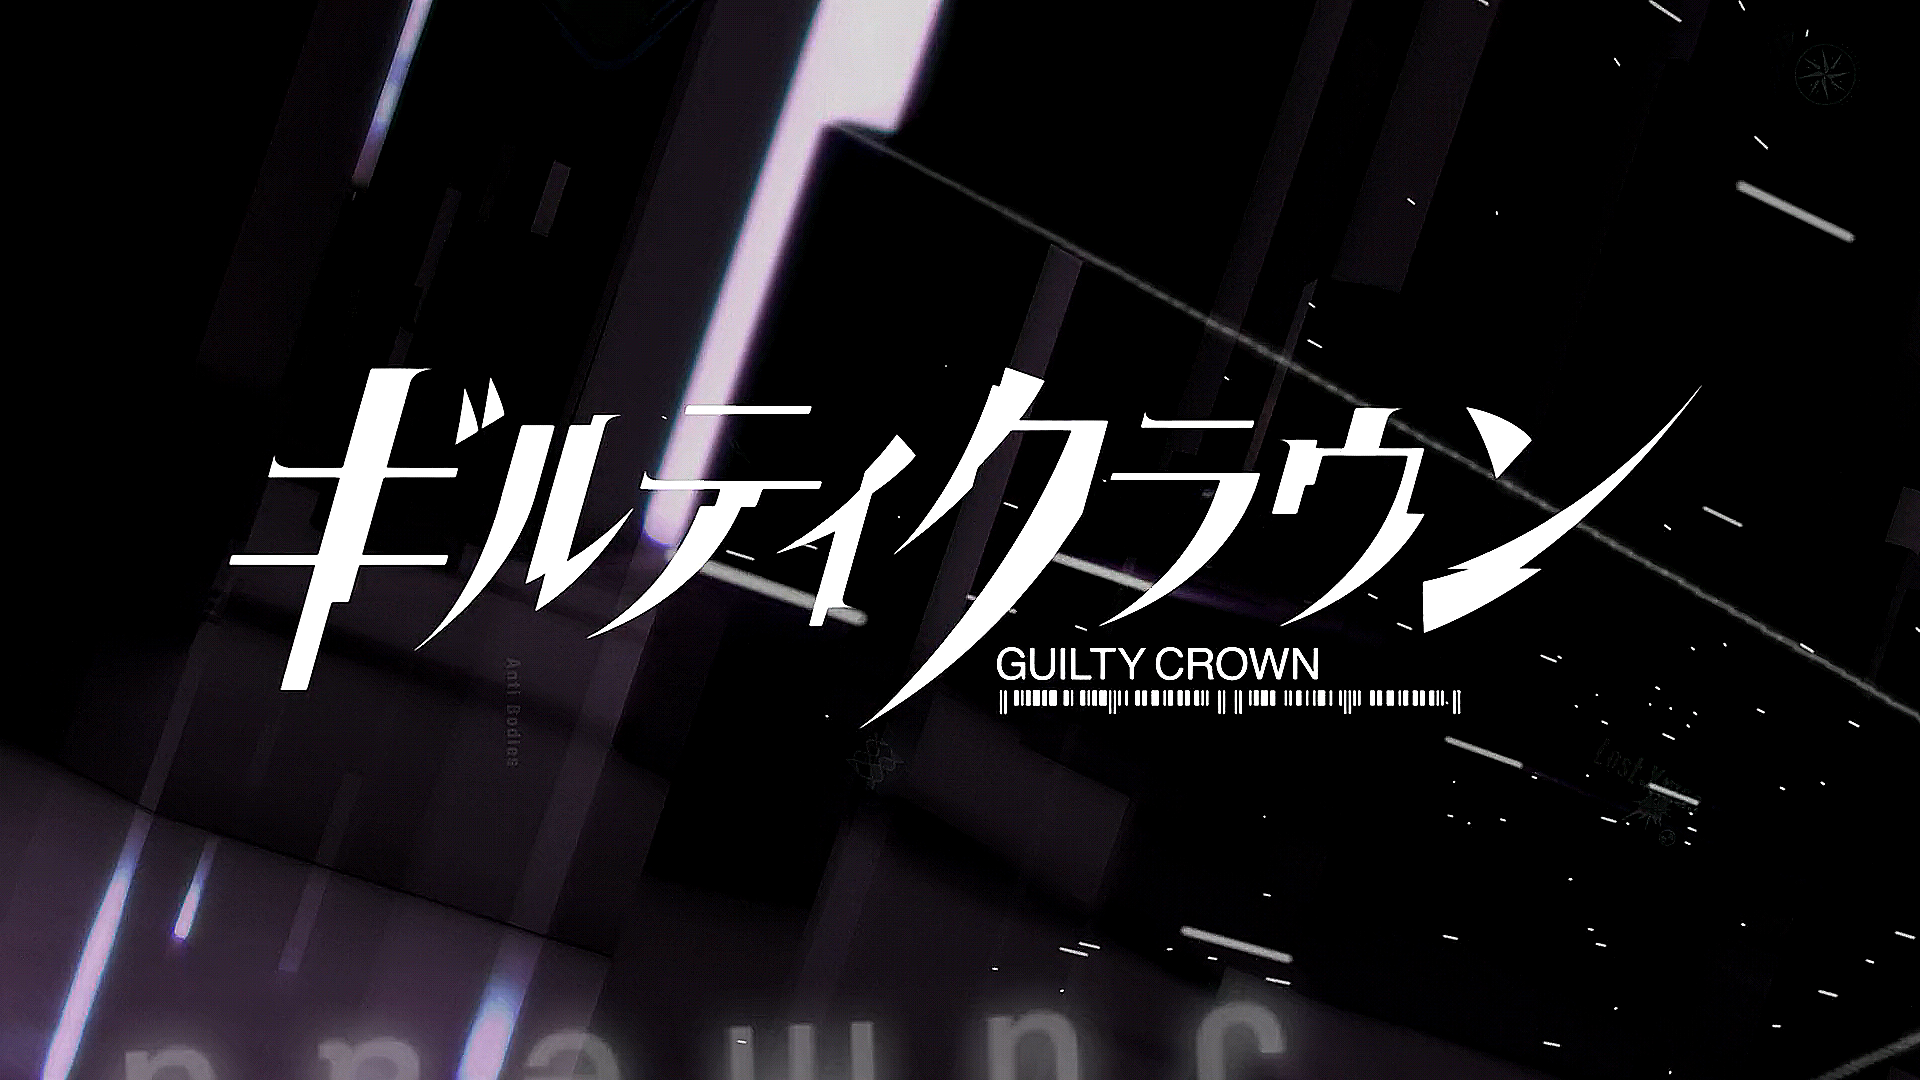 guilty crown Greeting Card for Sale by animedesigne4u